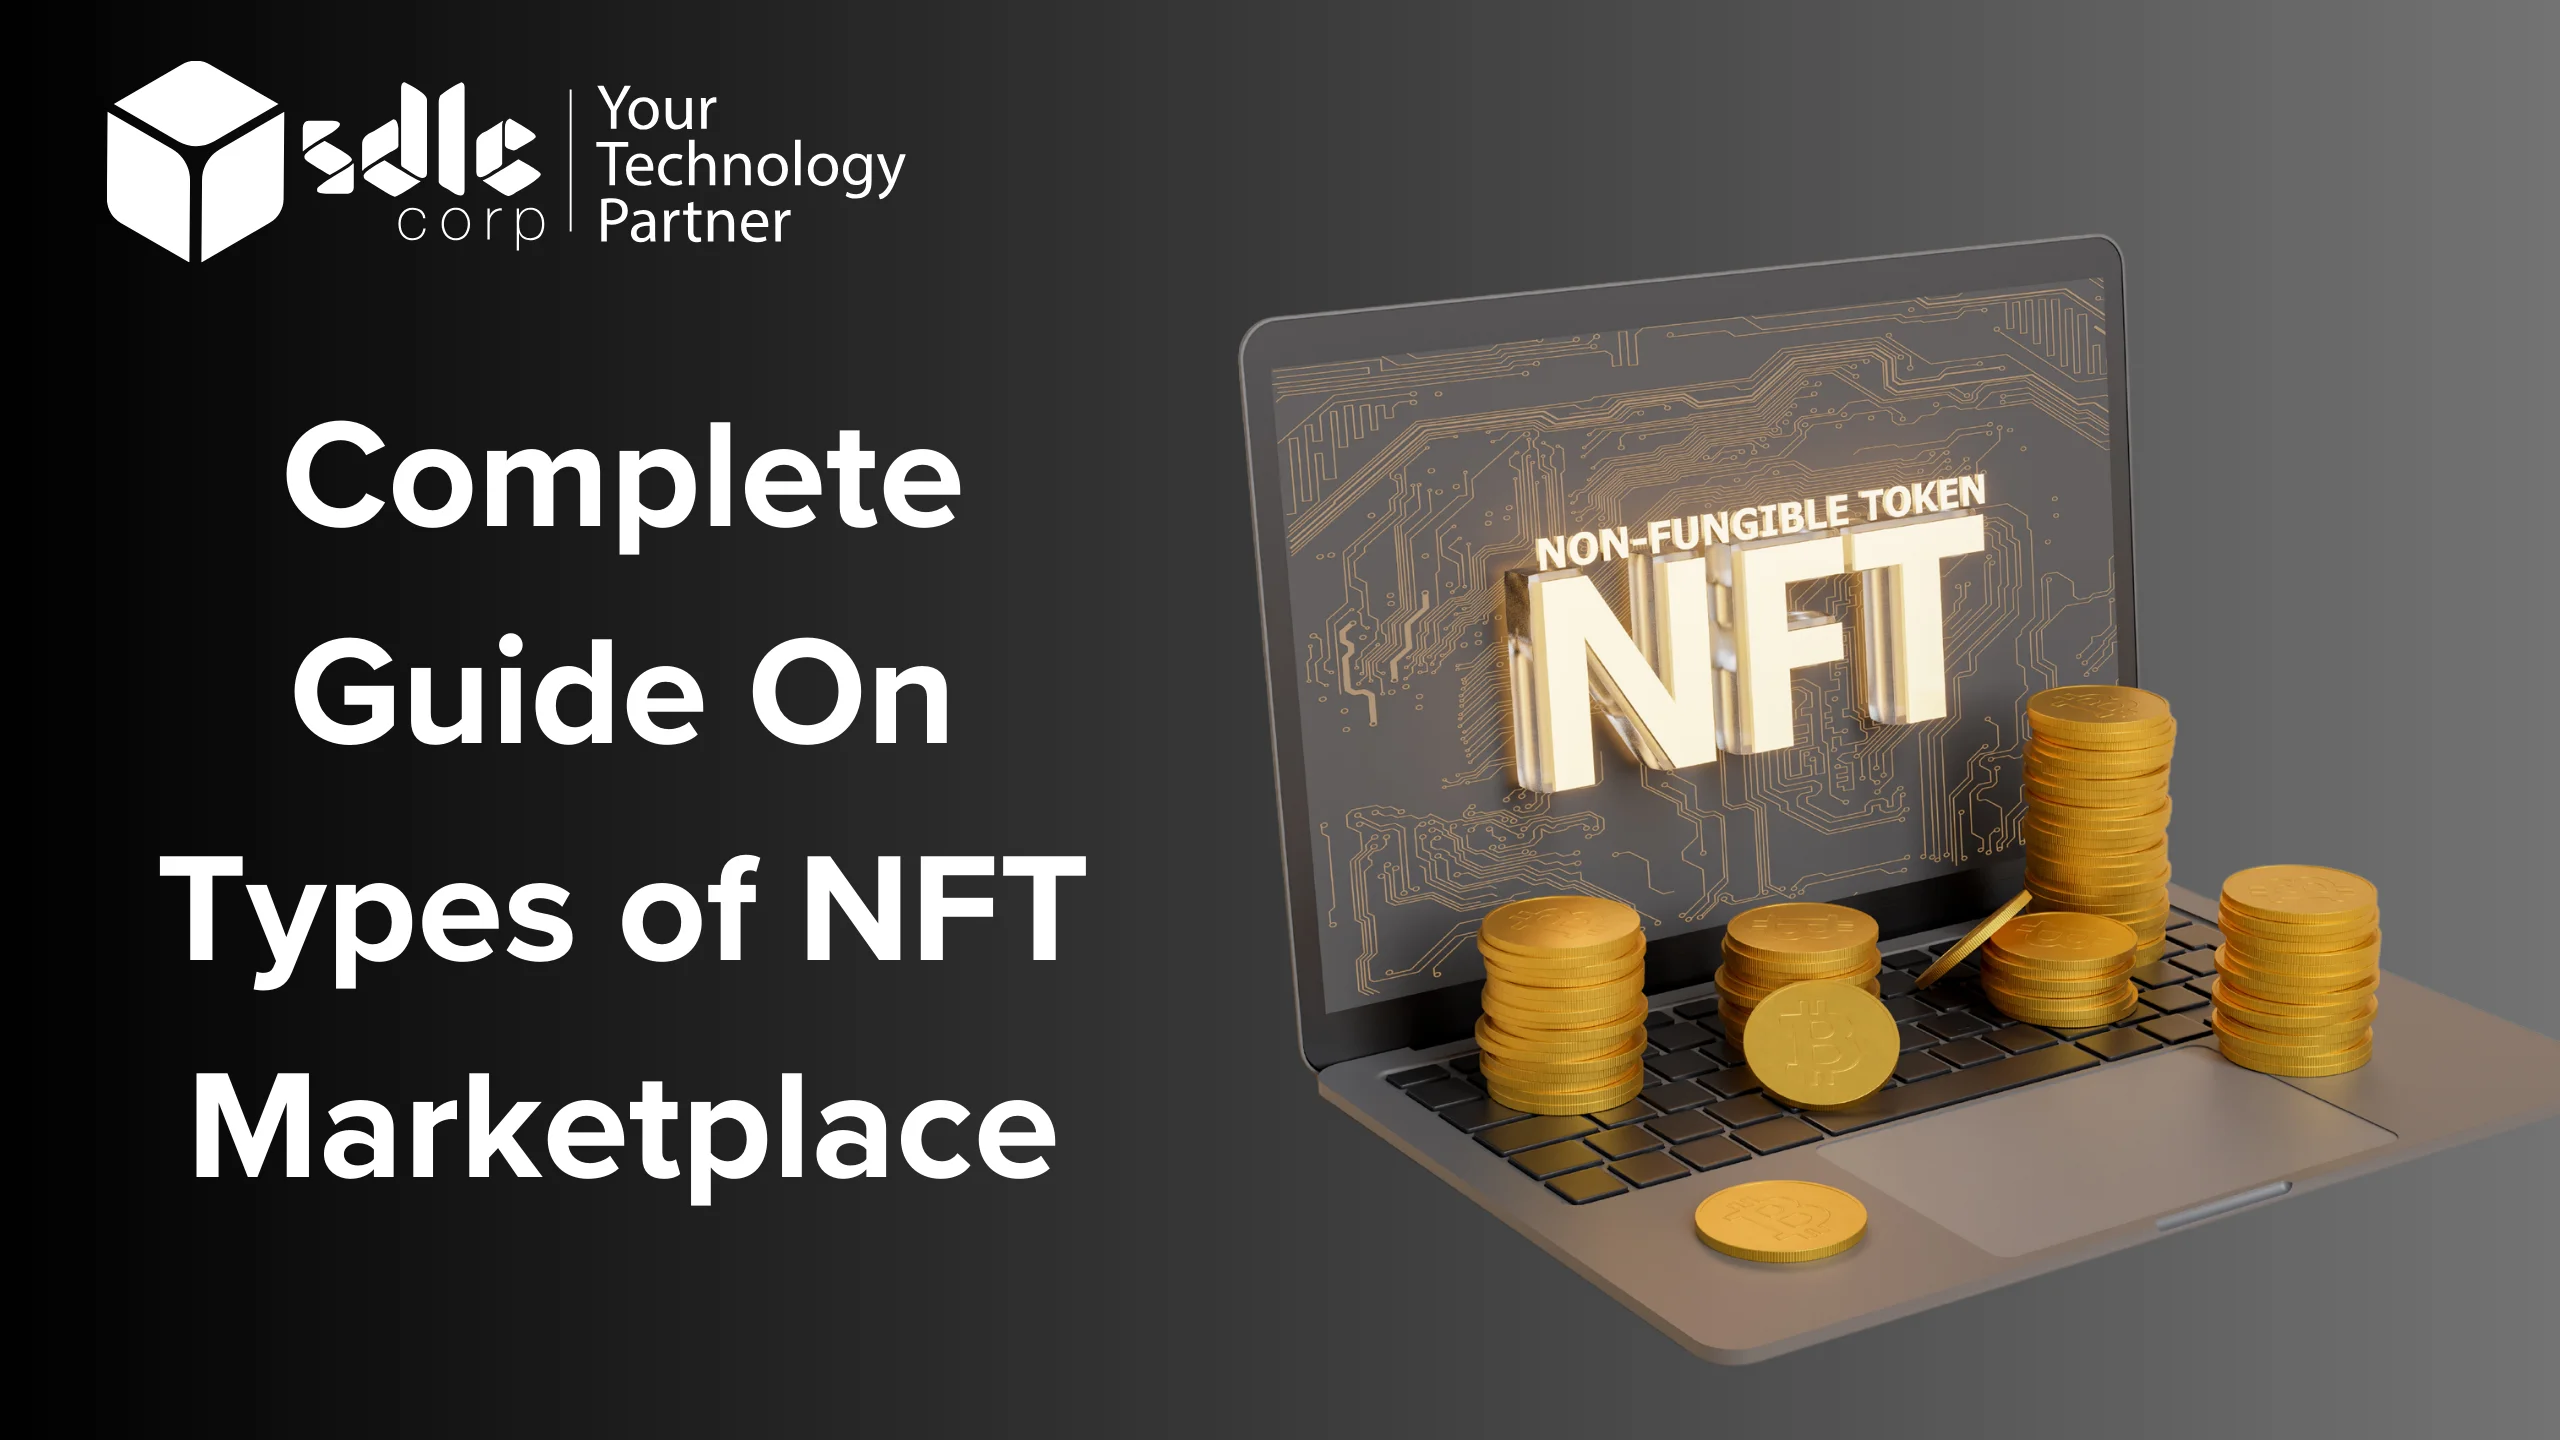 Complete-Guide-On-Types-of-NFT-Marketplace.webp